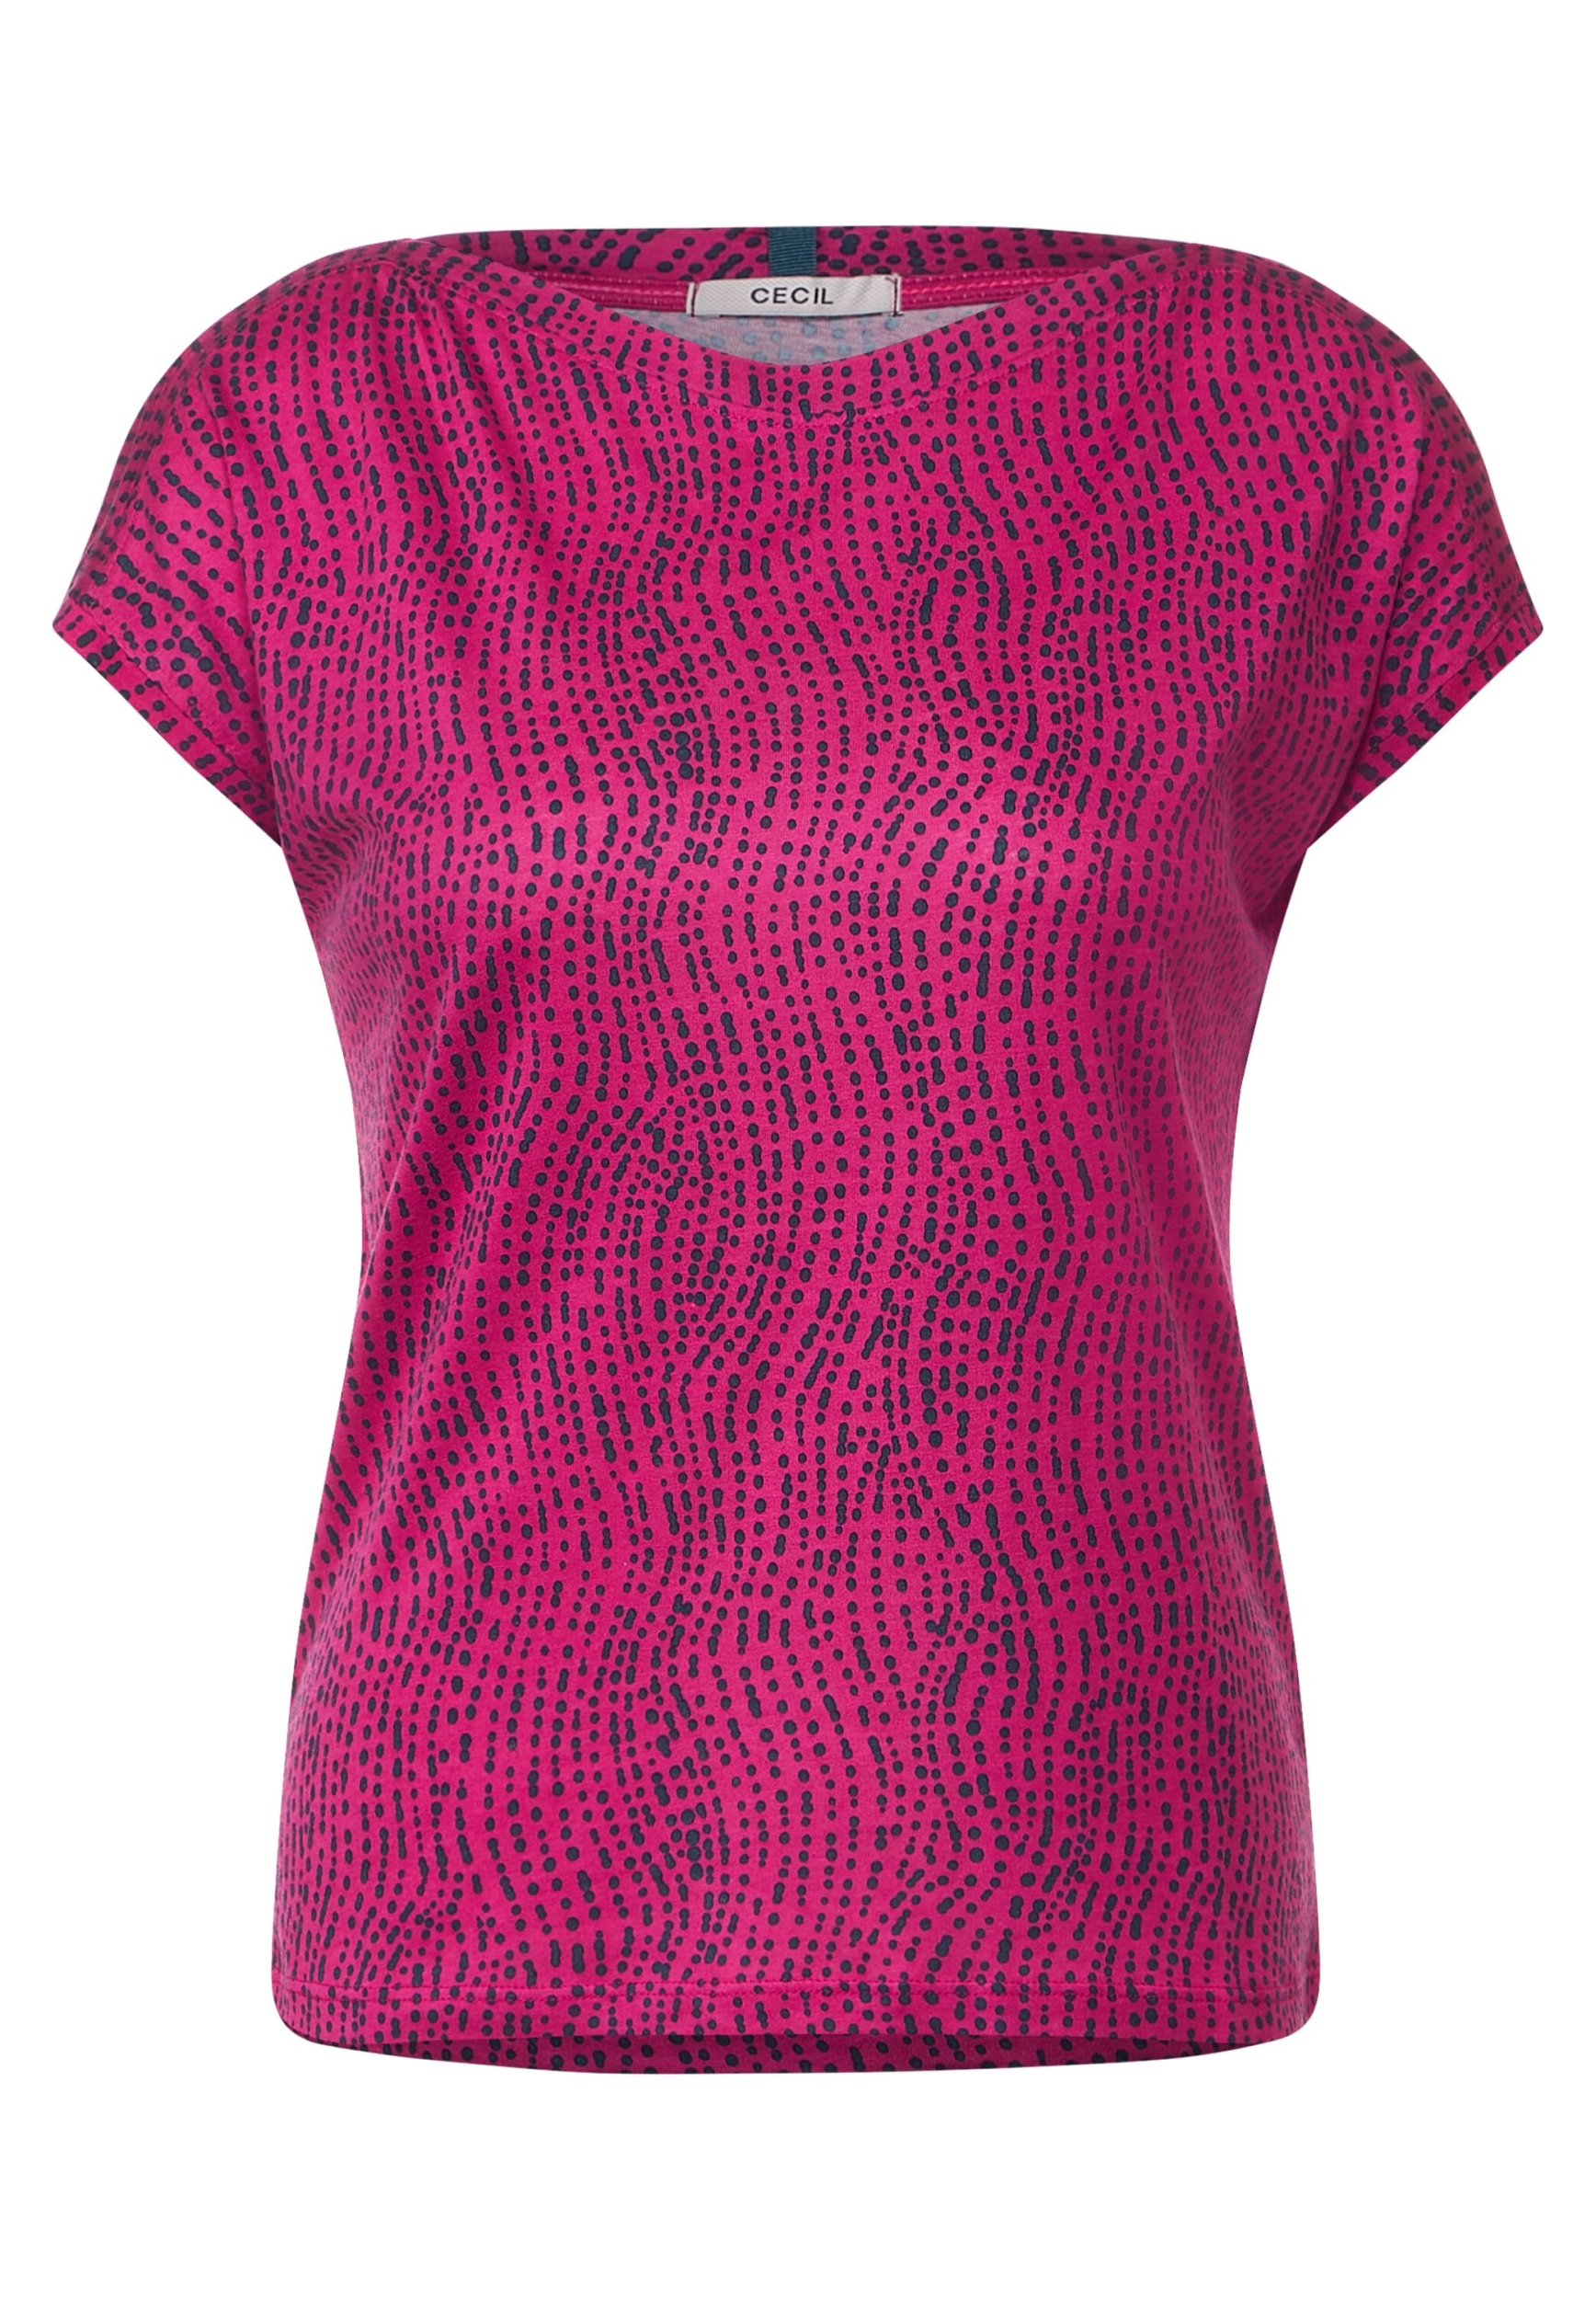 S | pink | TOS Weave cool T-Shirt Dotted B320331-25095-S | AOP